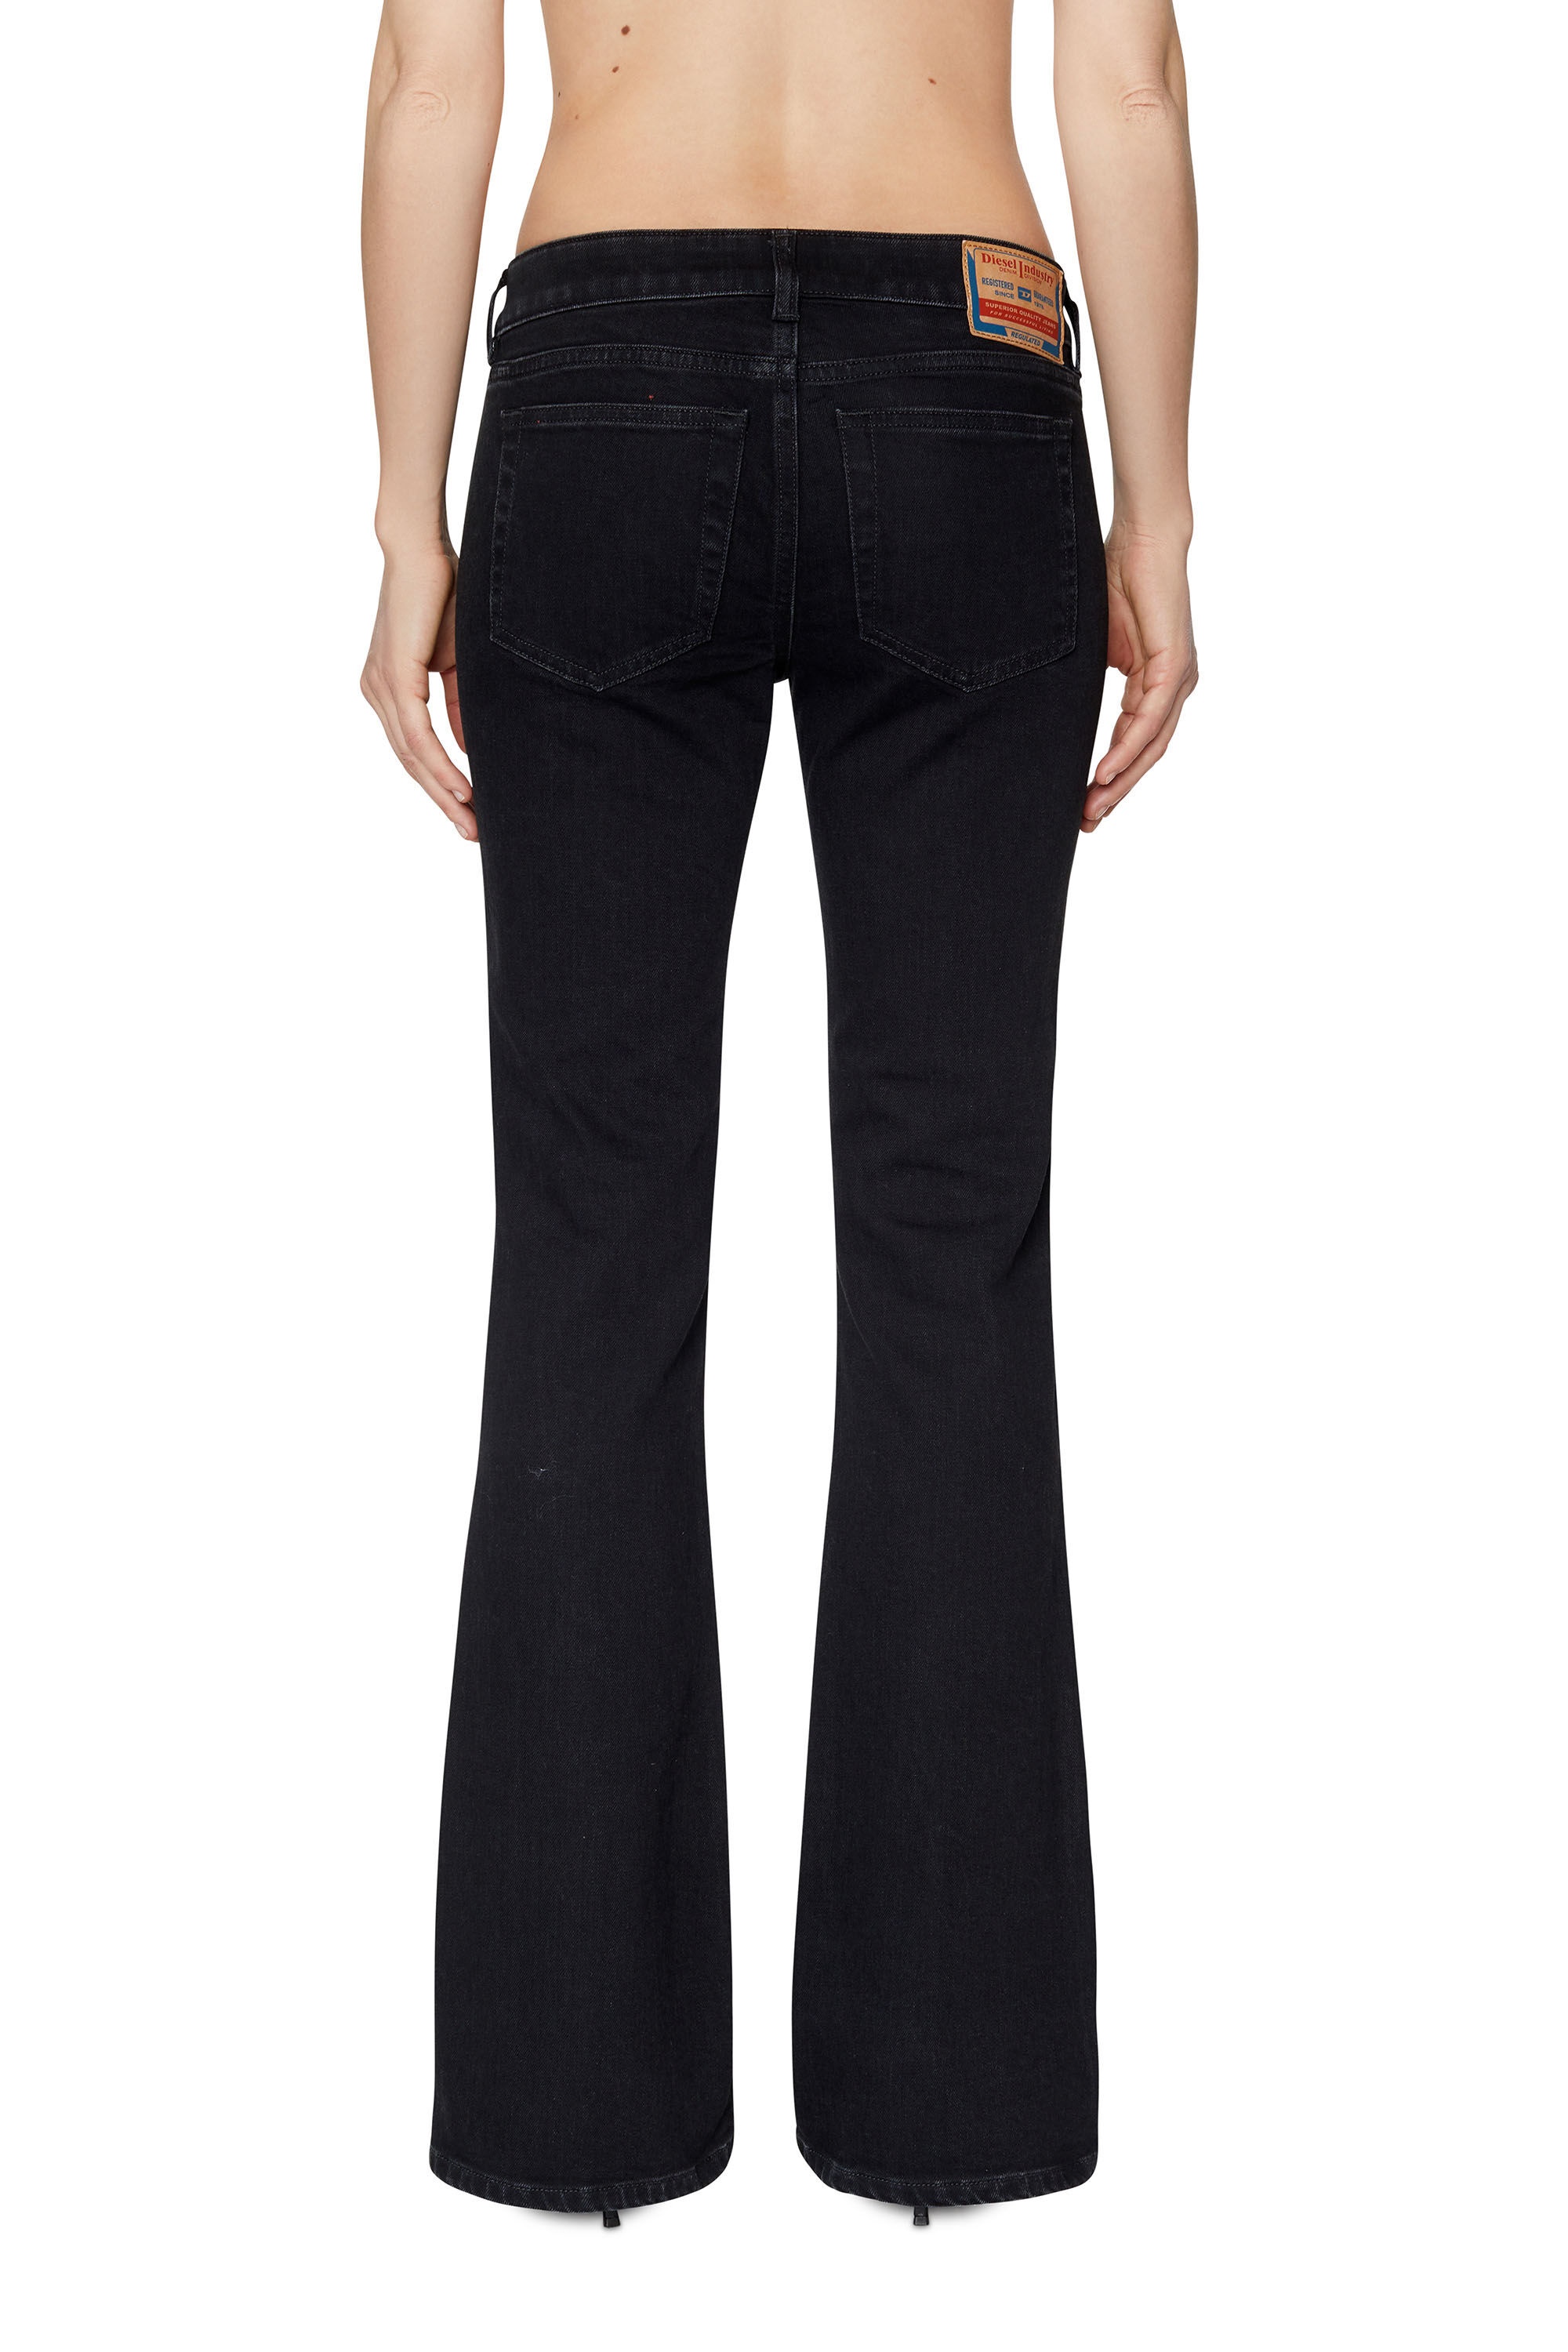 BOOTCUT AND FLARE JEANS 1969 D-EBBEY Z9C25 - 5